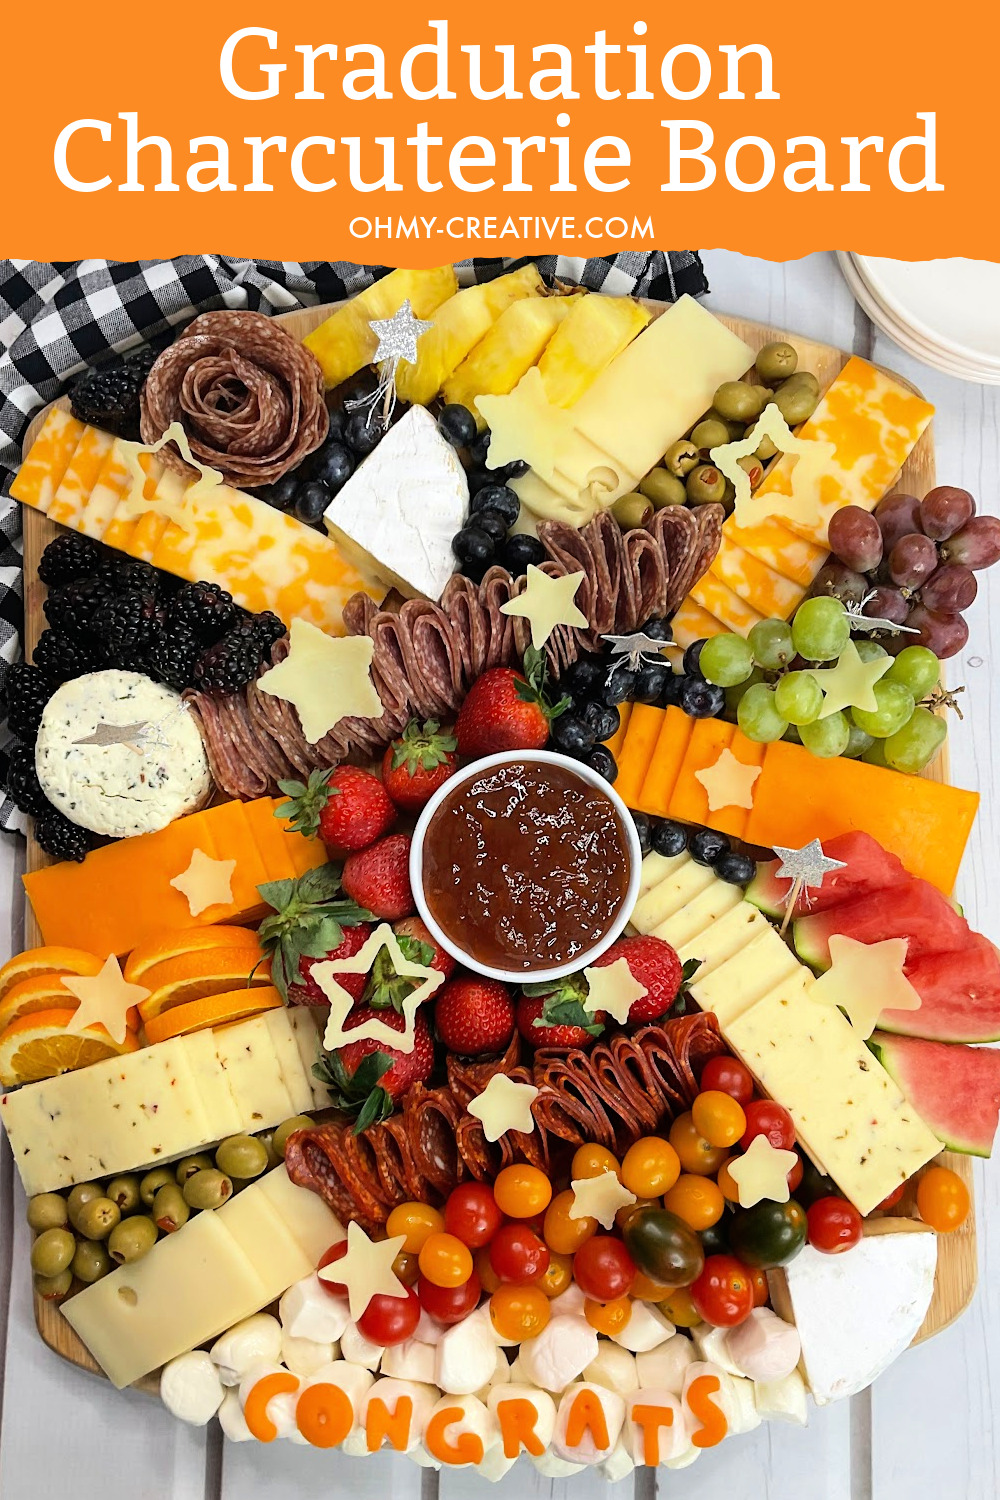 The ultimate graduation party foods - graduation party charcuterie board with the congrats made out of cheeses and jams and dips.